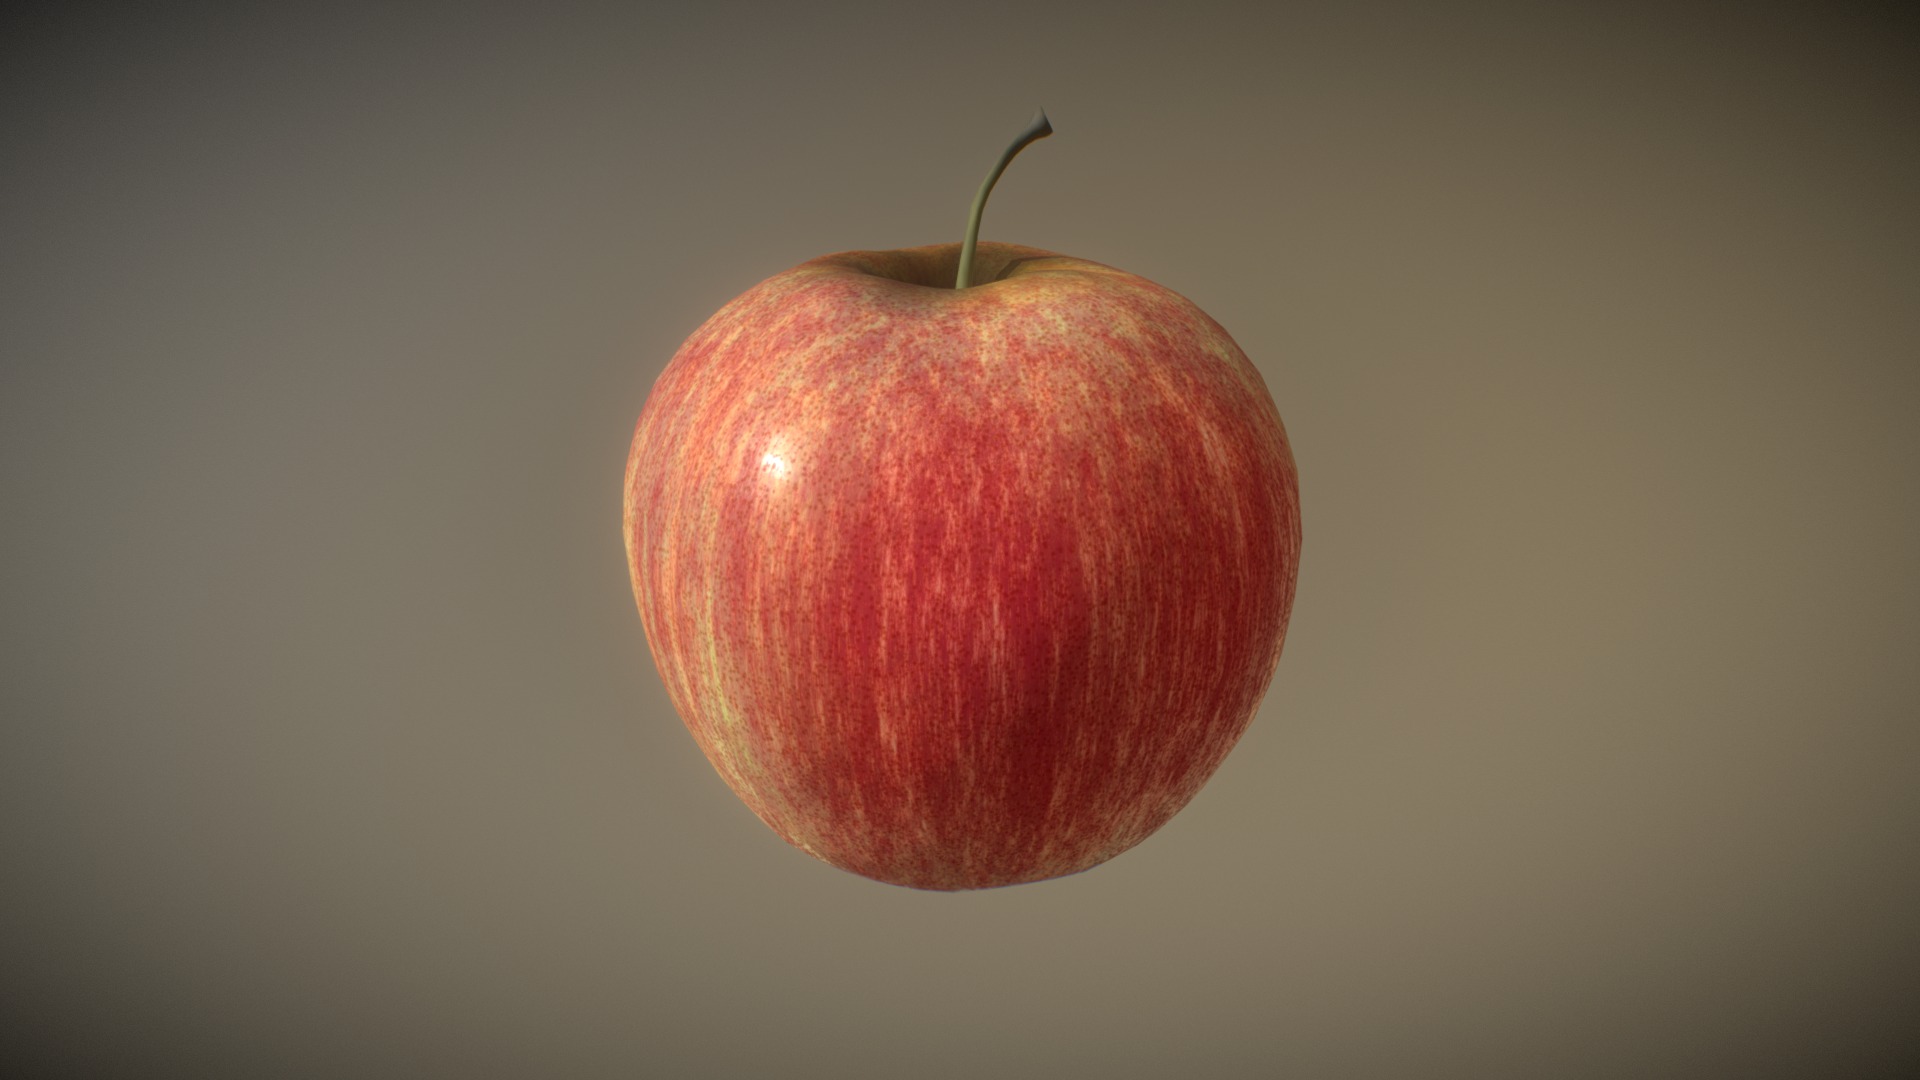 3D model Apple Fruit - This is a 3D model of the Apple Fruit. The 3D model is about a red apple on a white surface.